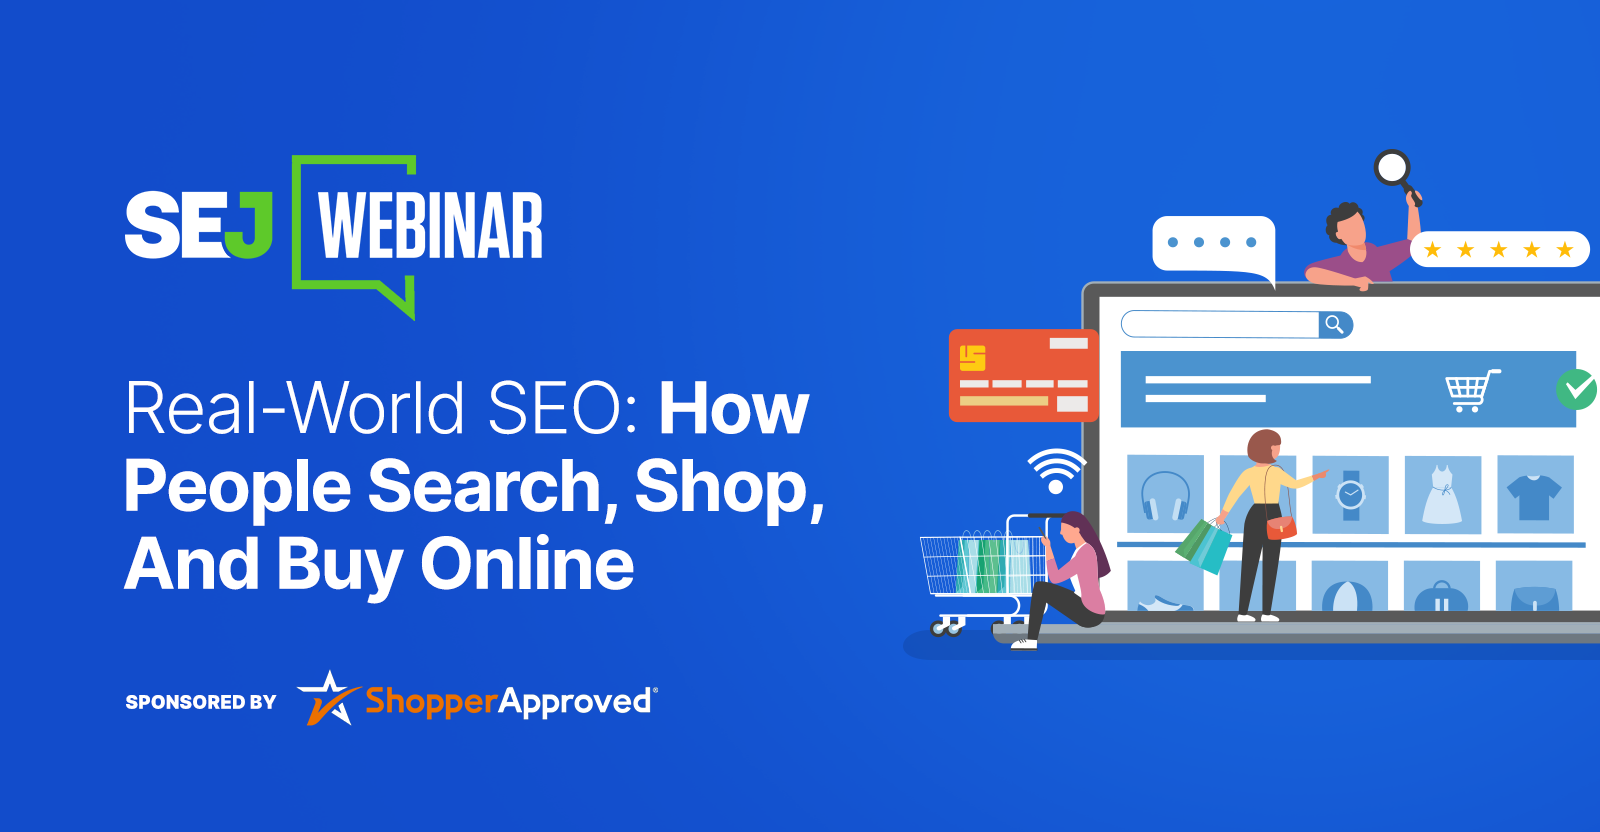 Real-World SEO – How People Search, Shop & Buy Online